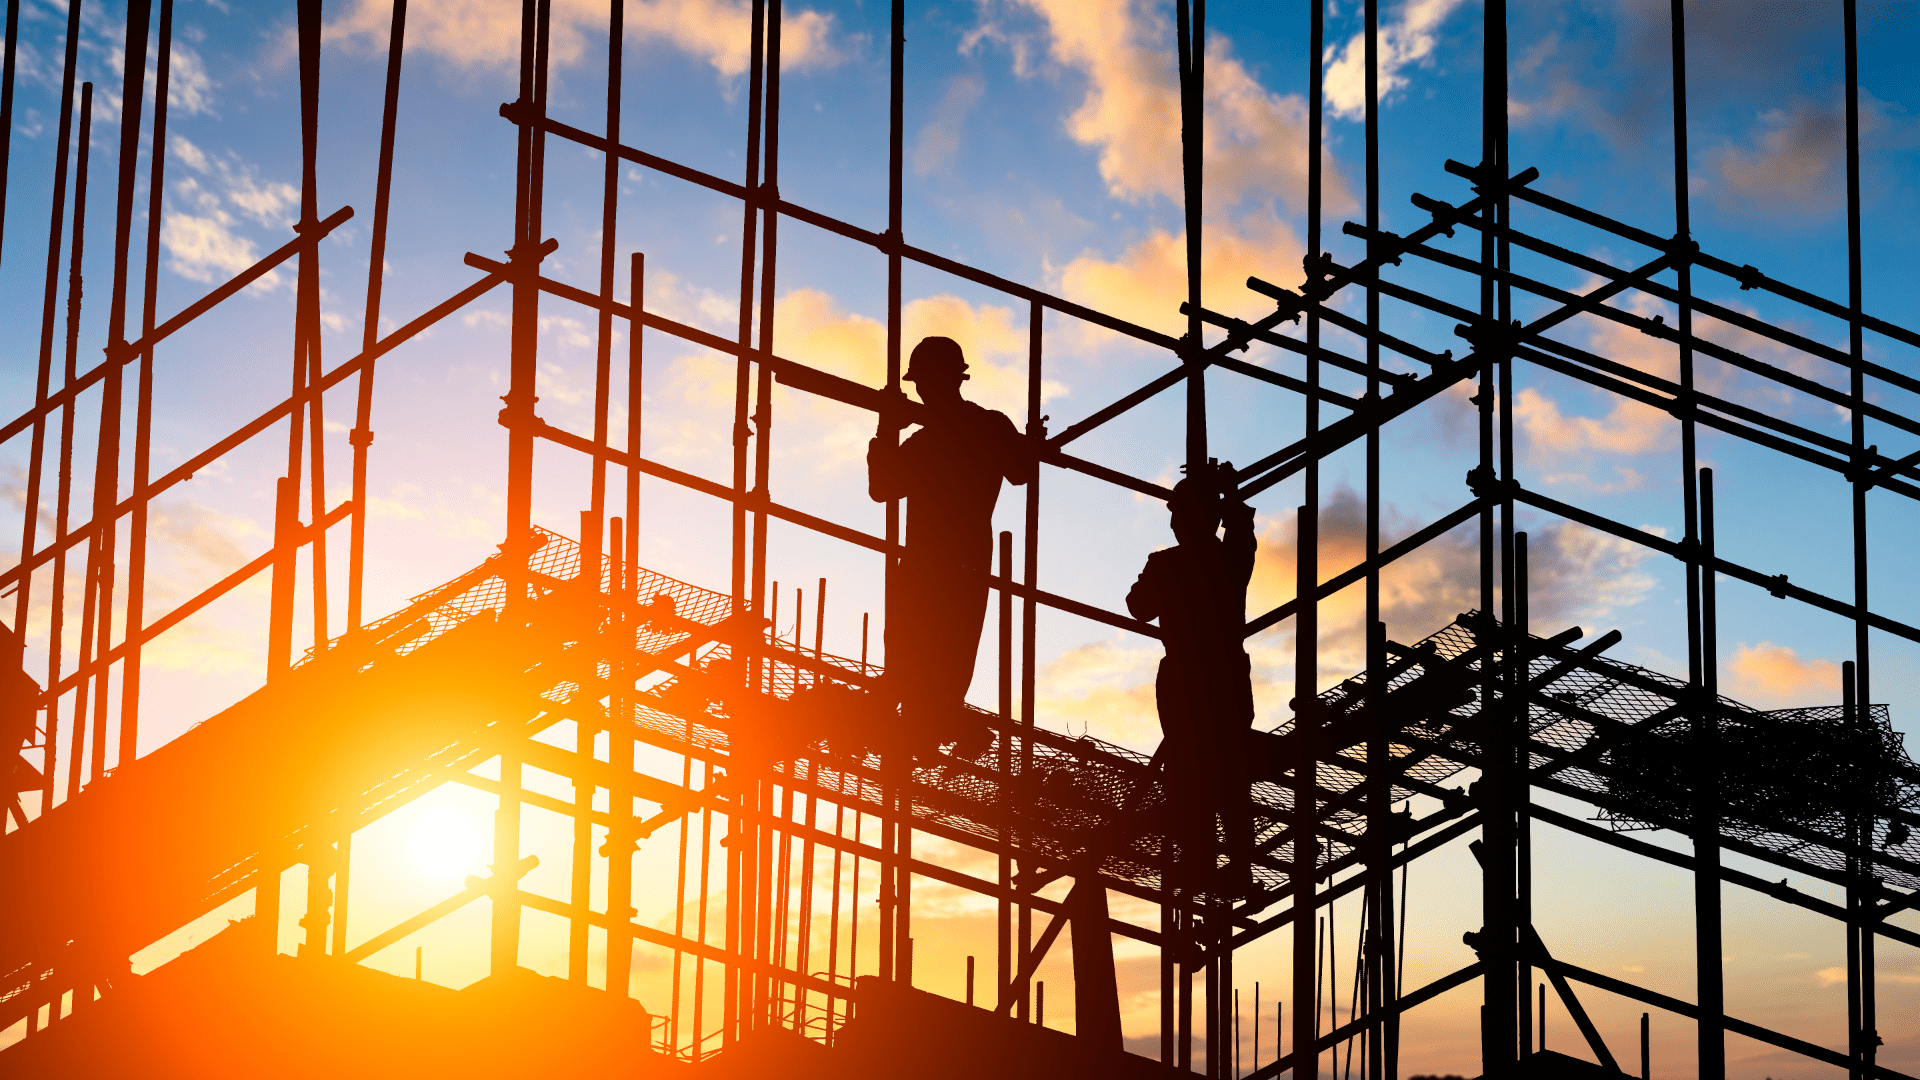 Construction Workers on Scaffolding During Sunset